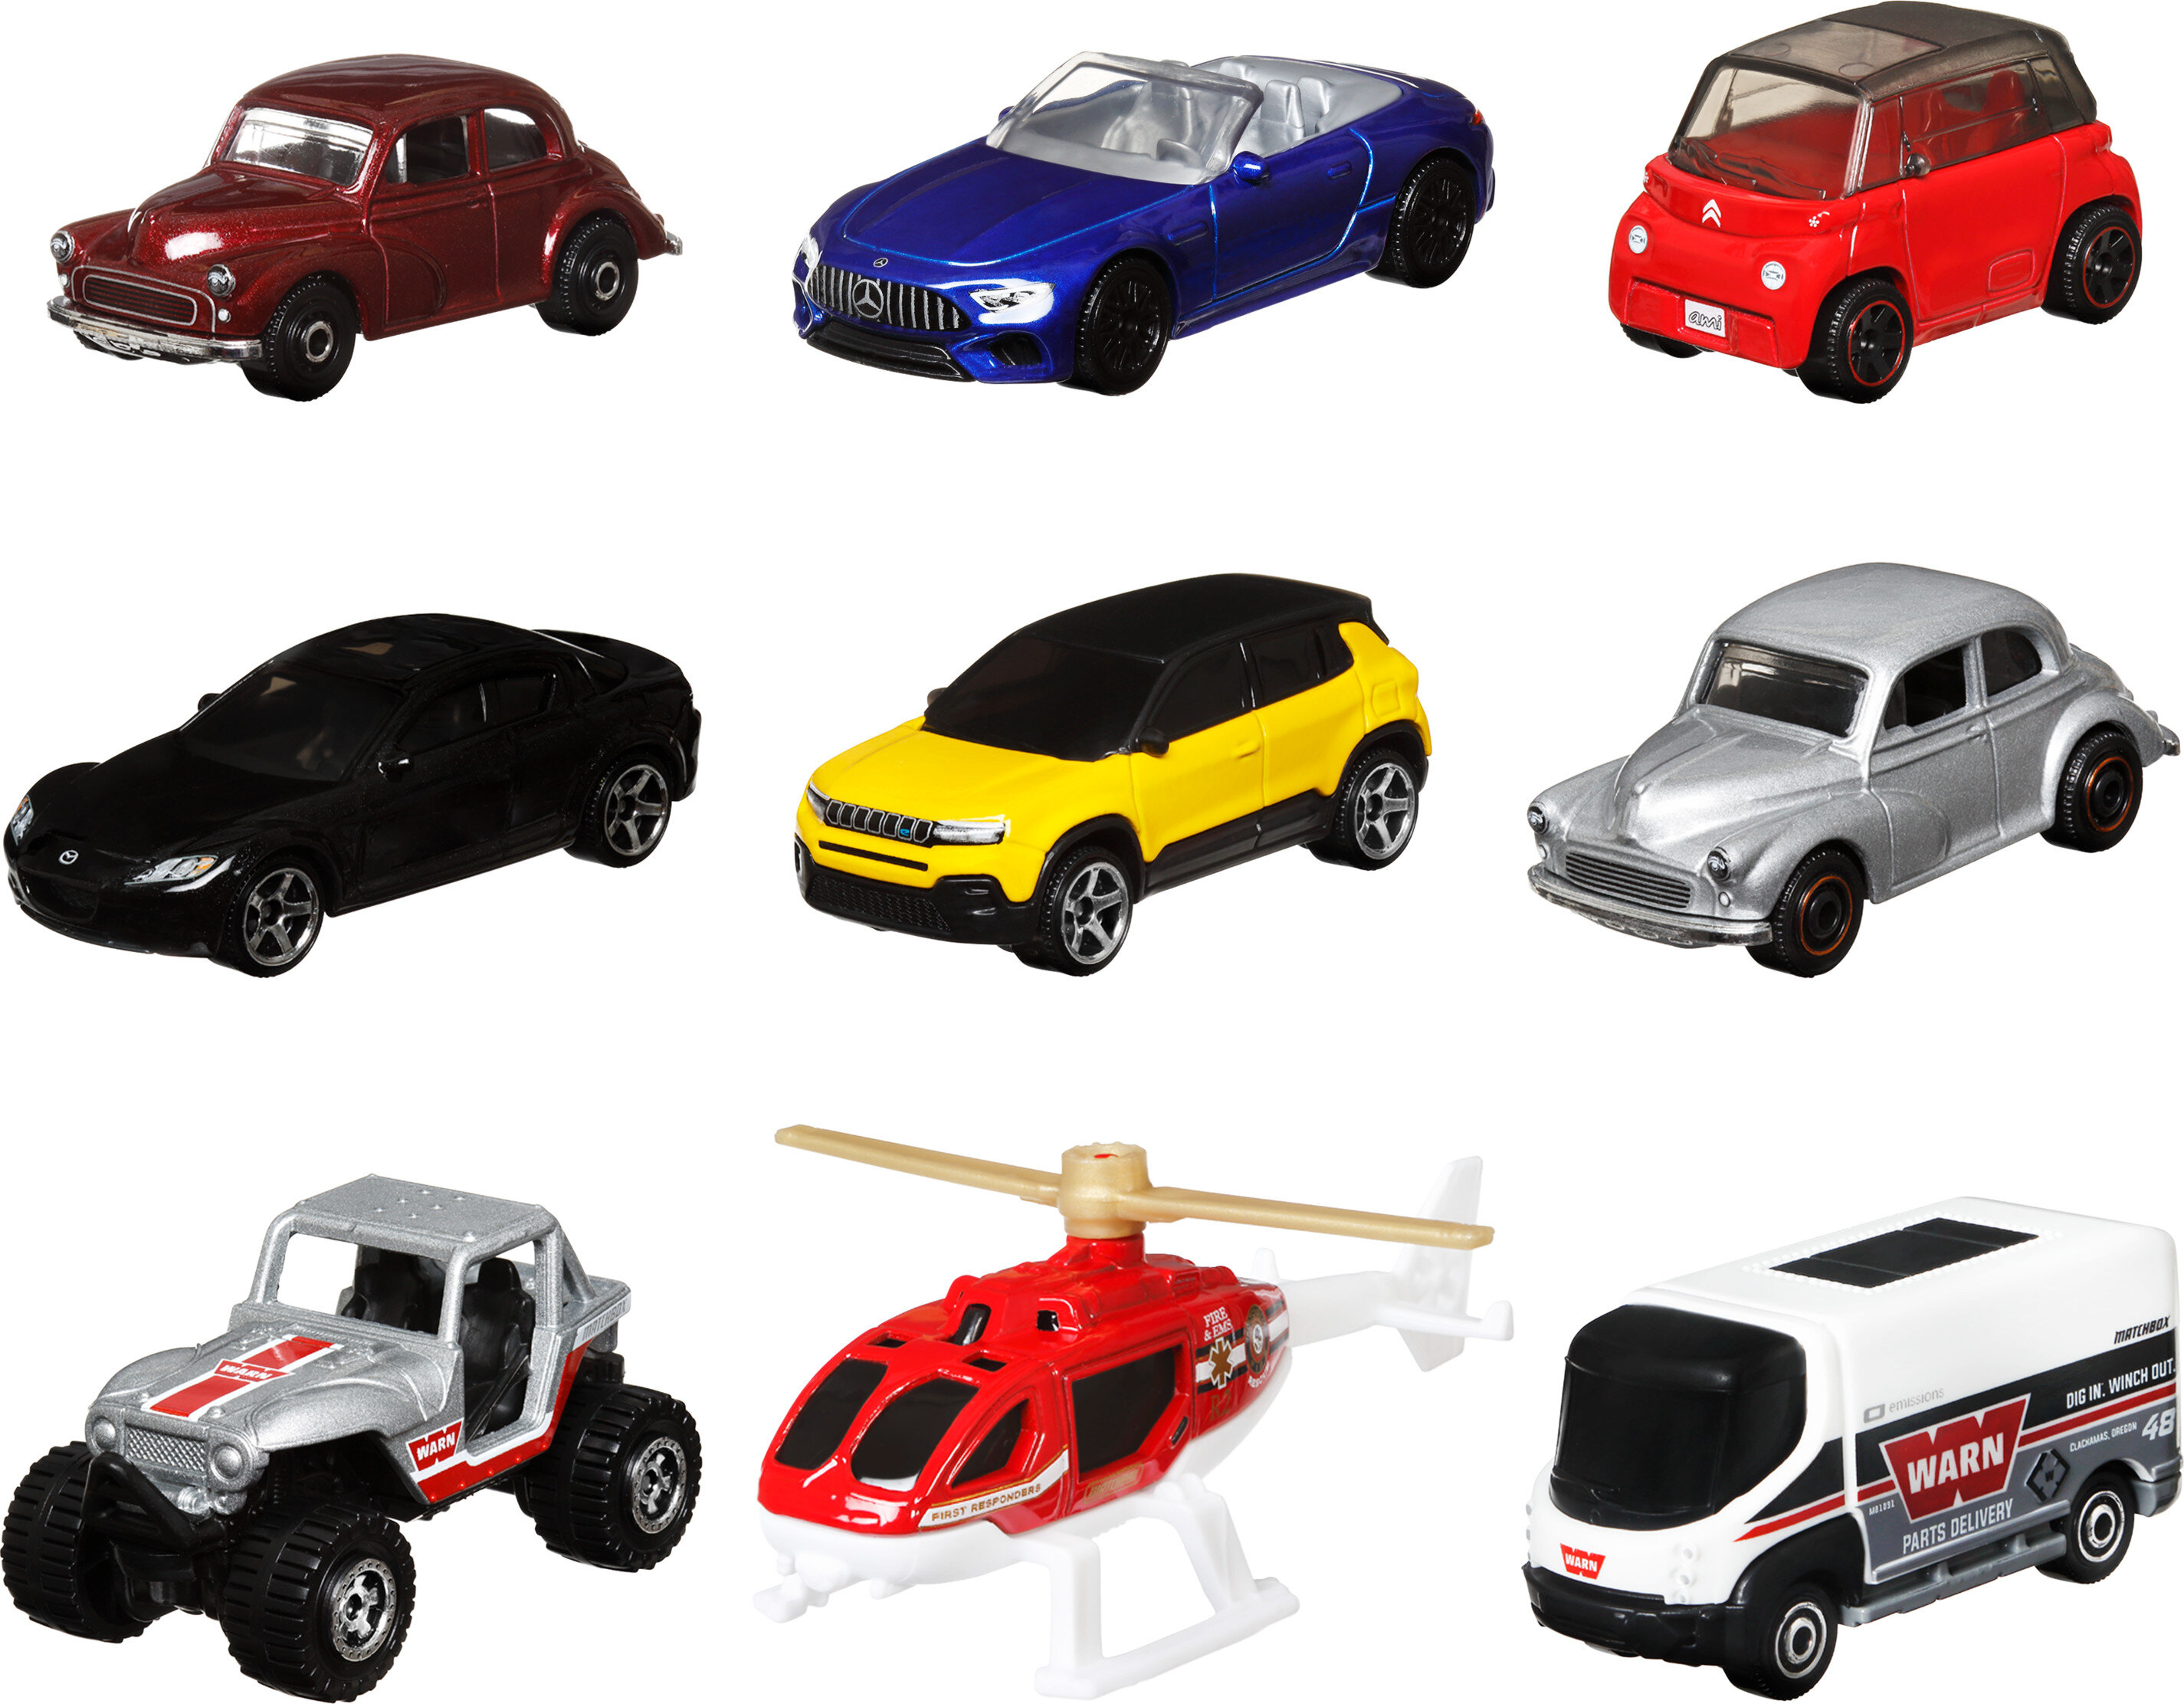 Matchbox Gift Set of 9 Themed Cars or Trucks in 1:64 Scale (Styles May Vary) - image 5 of 6